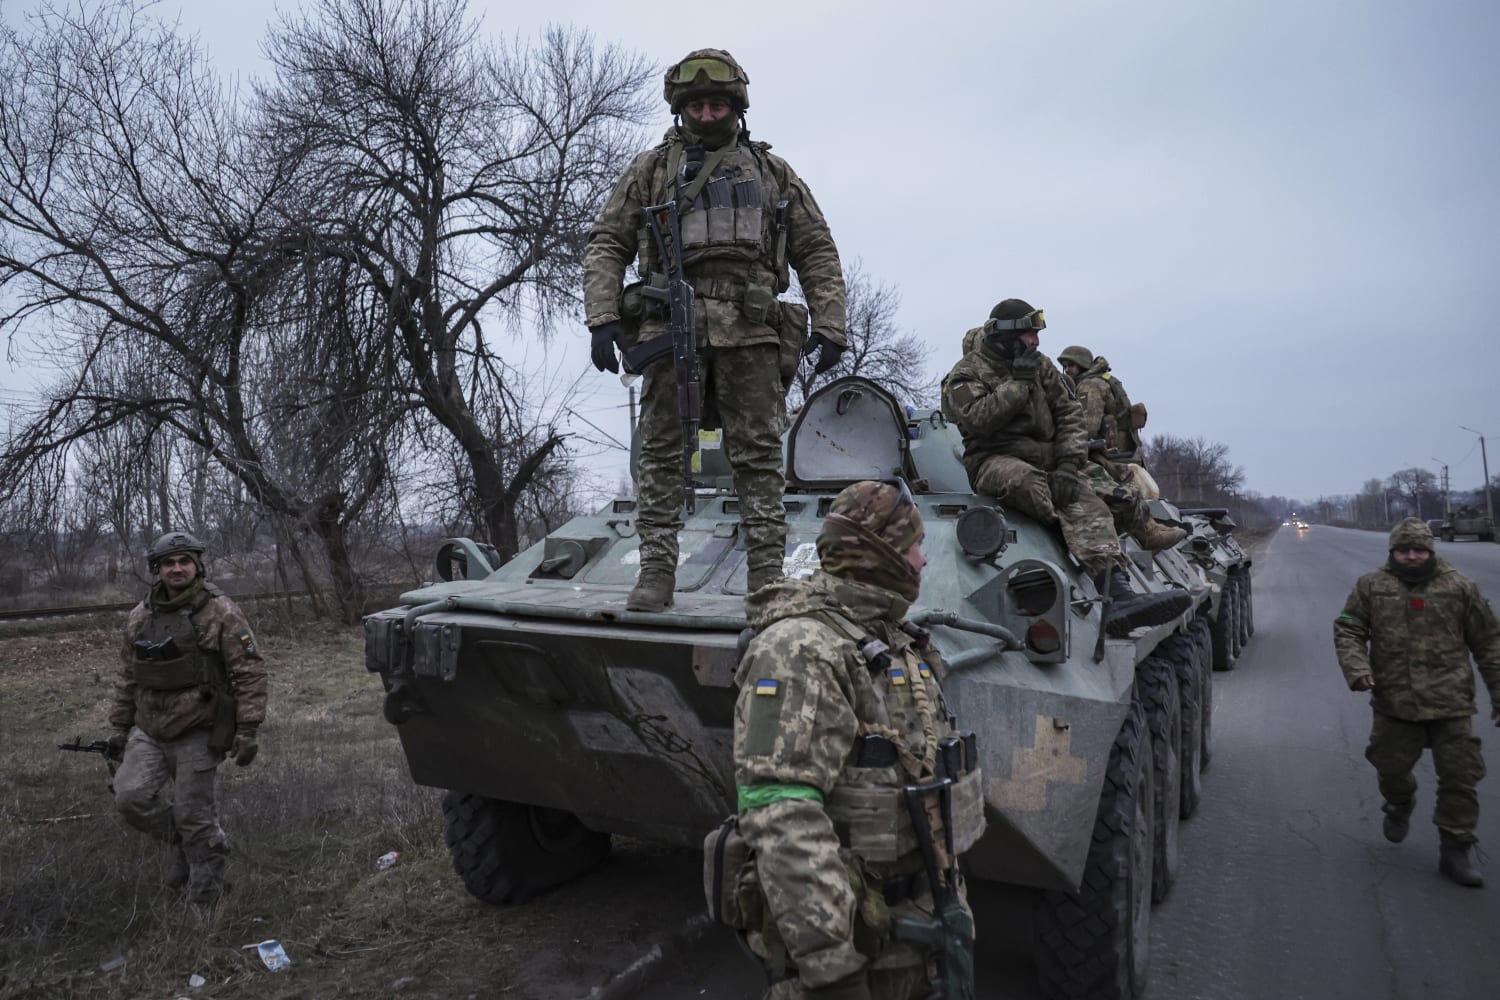 Ukraine repels attacks in eastern region while Russia’s Wagner claims to have taken a village